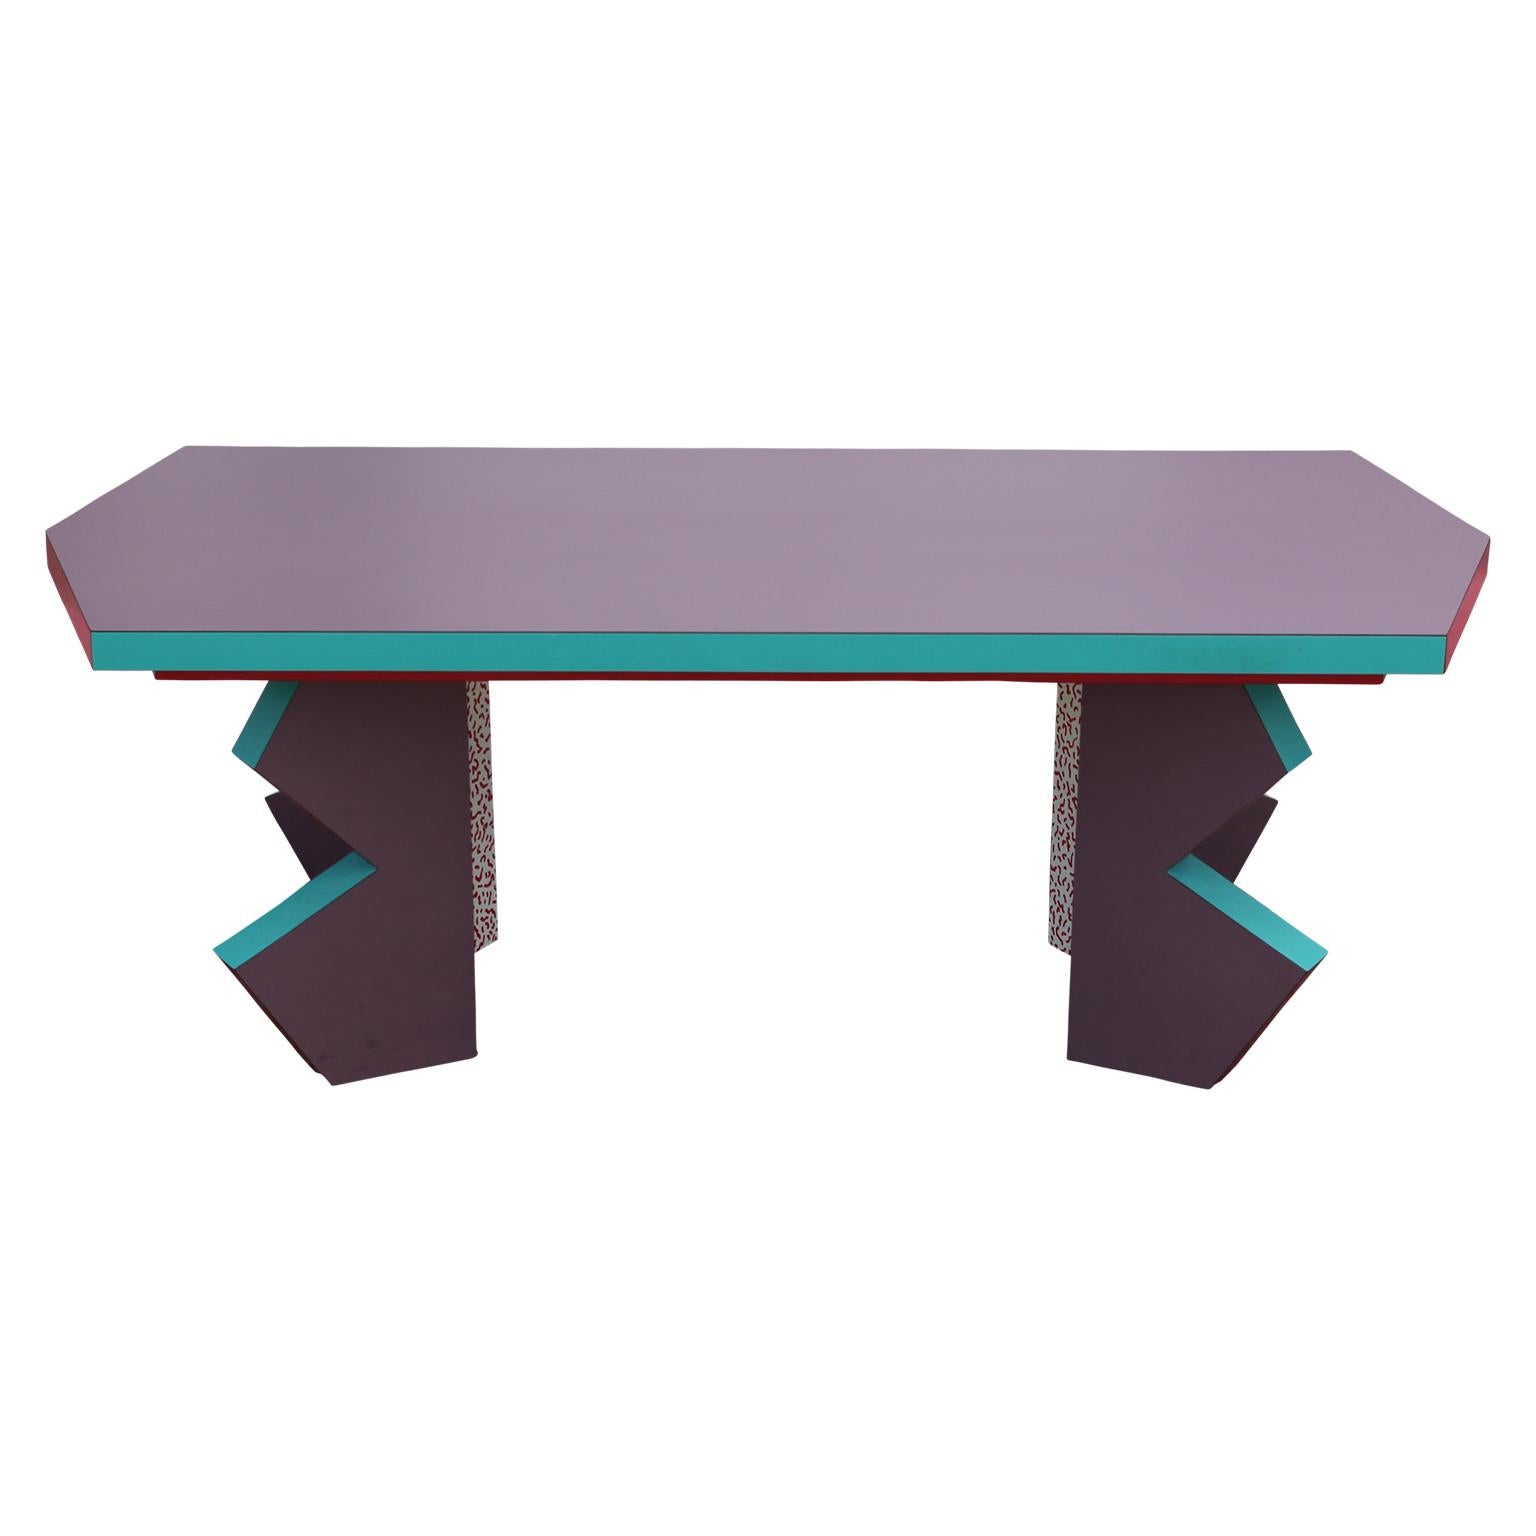 Memphis style pink, teal and purple coffee table with a red and white decorative pattern on the inside of the legs.